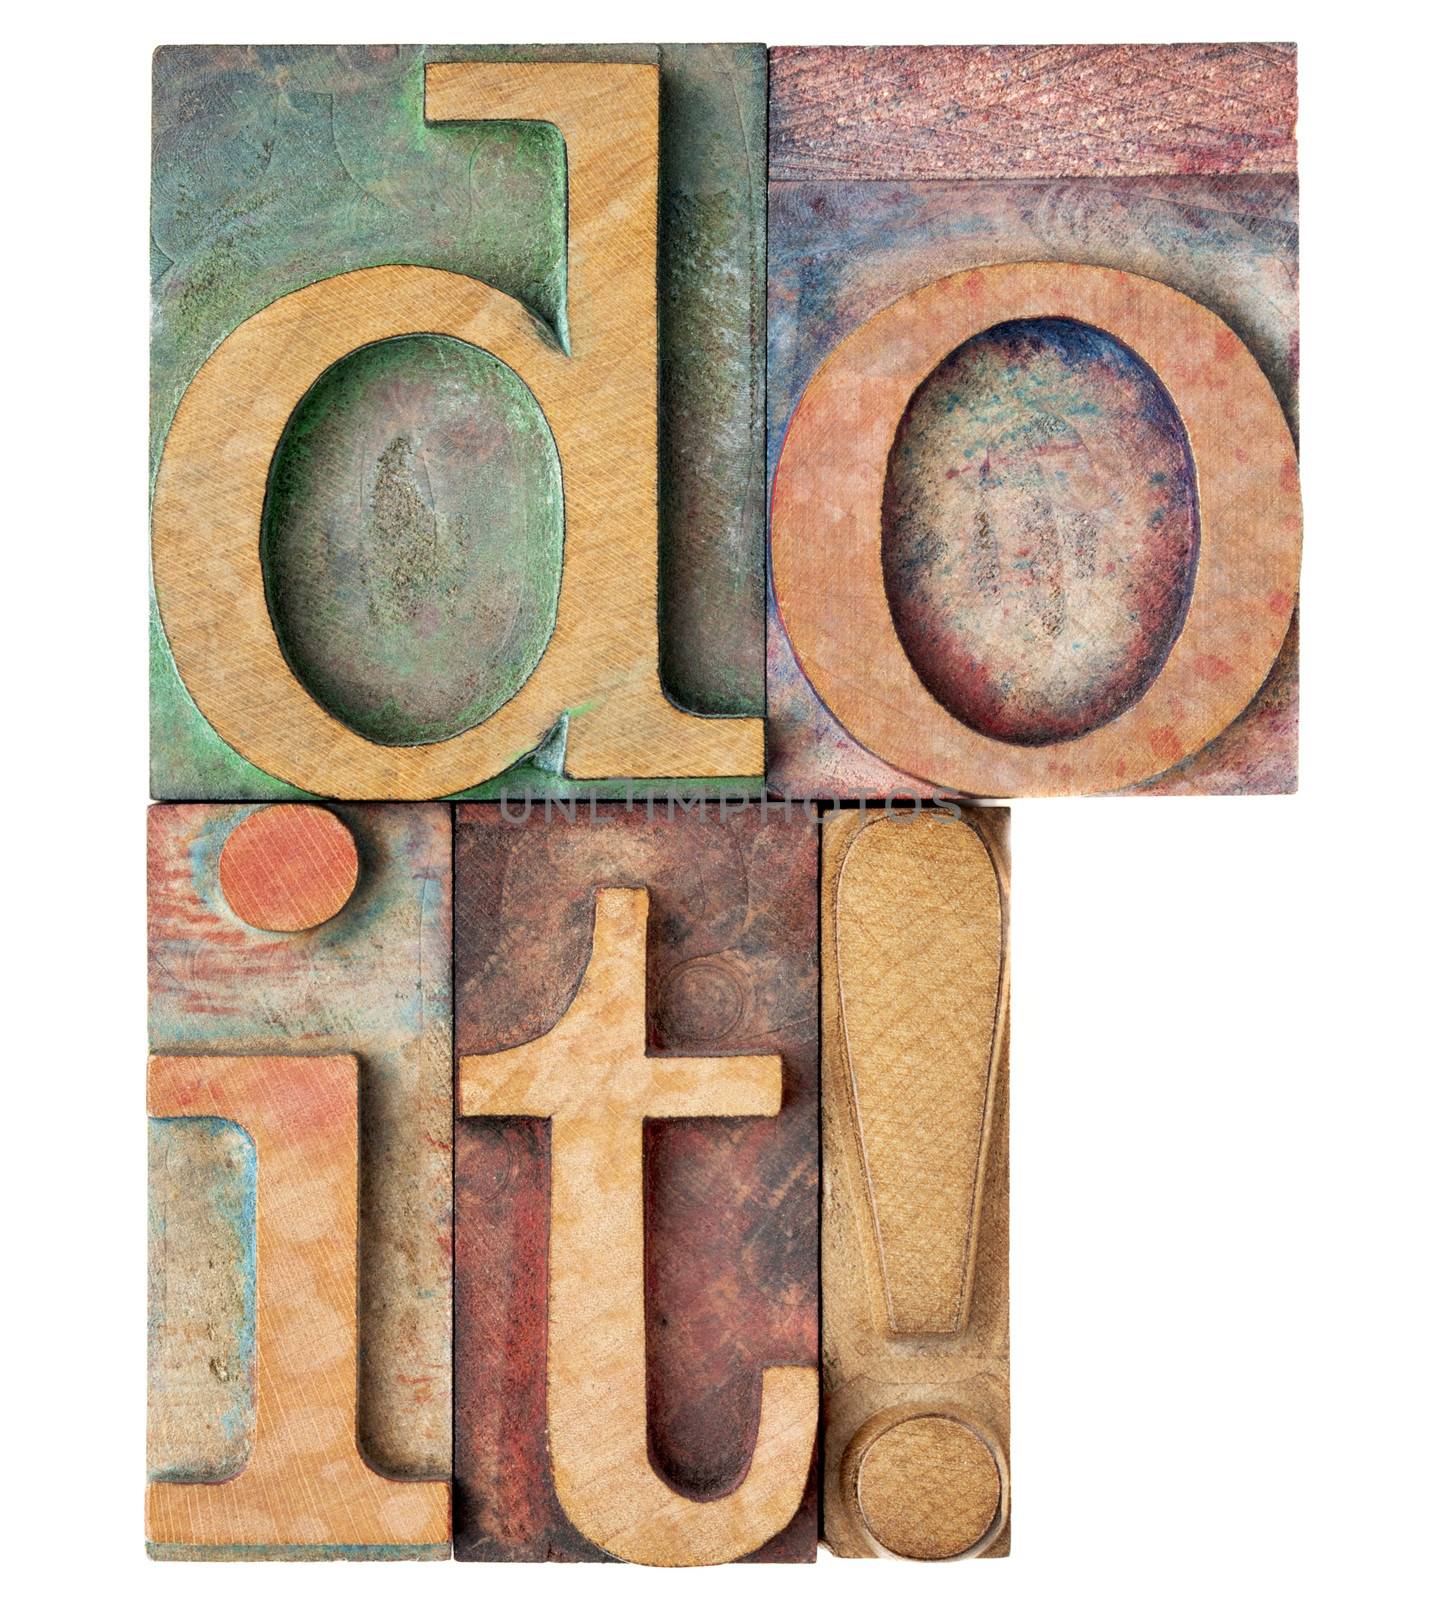 do it exclamation - motivation concept - isolated text in vintage wood letterpress printing blocks stained by color inks